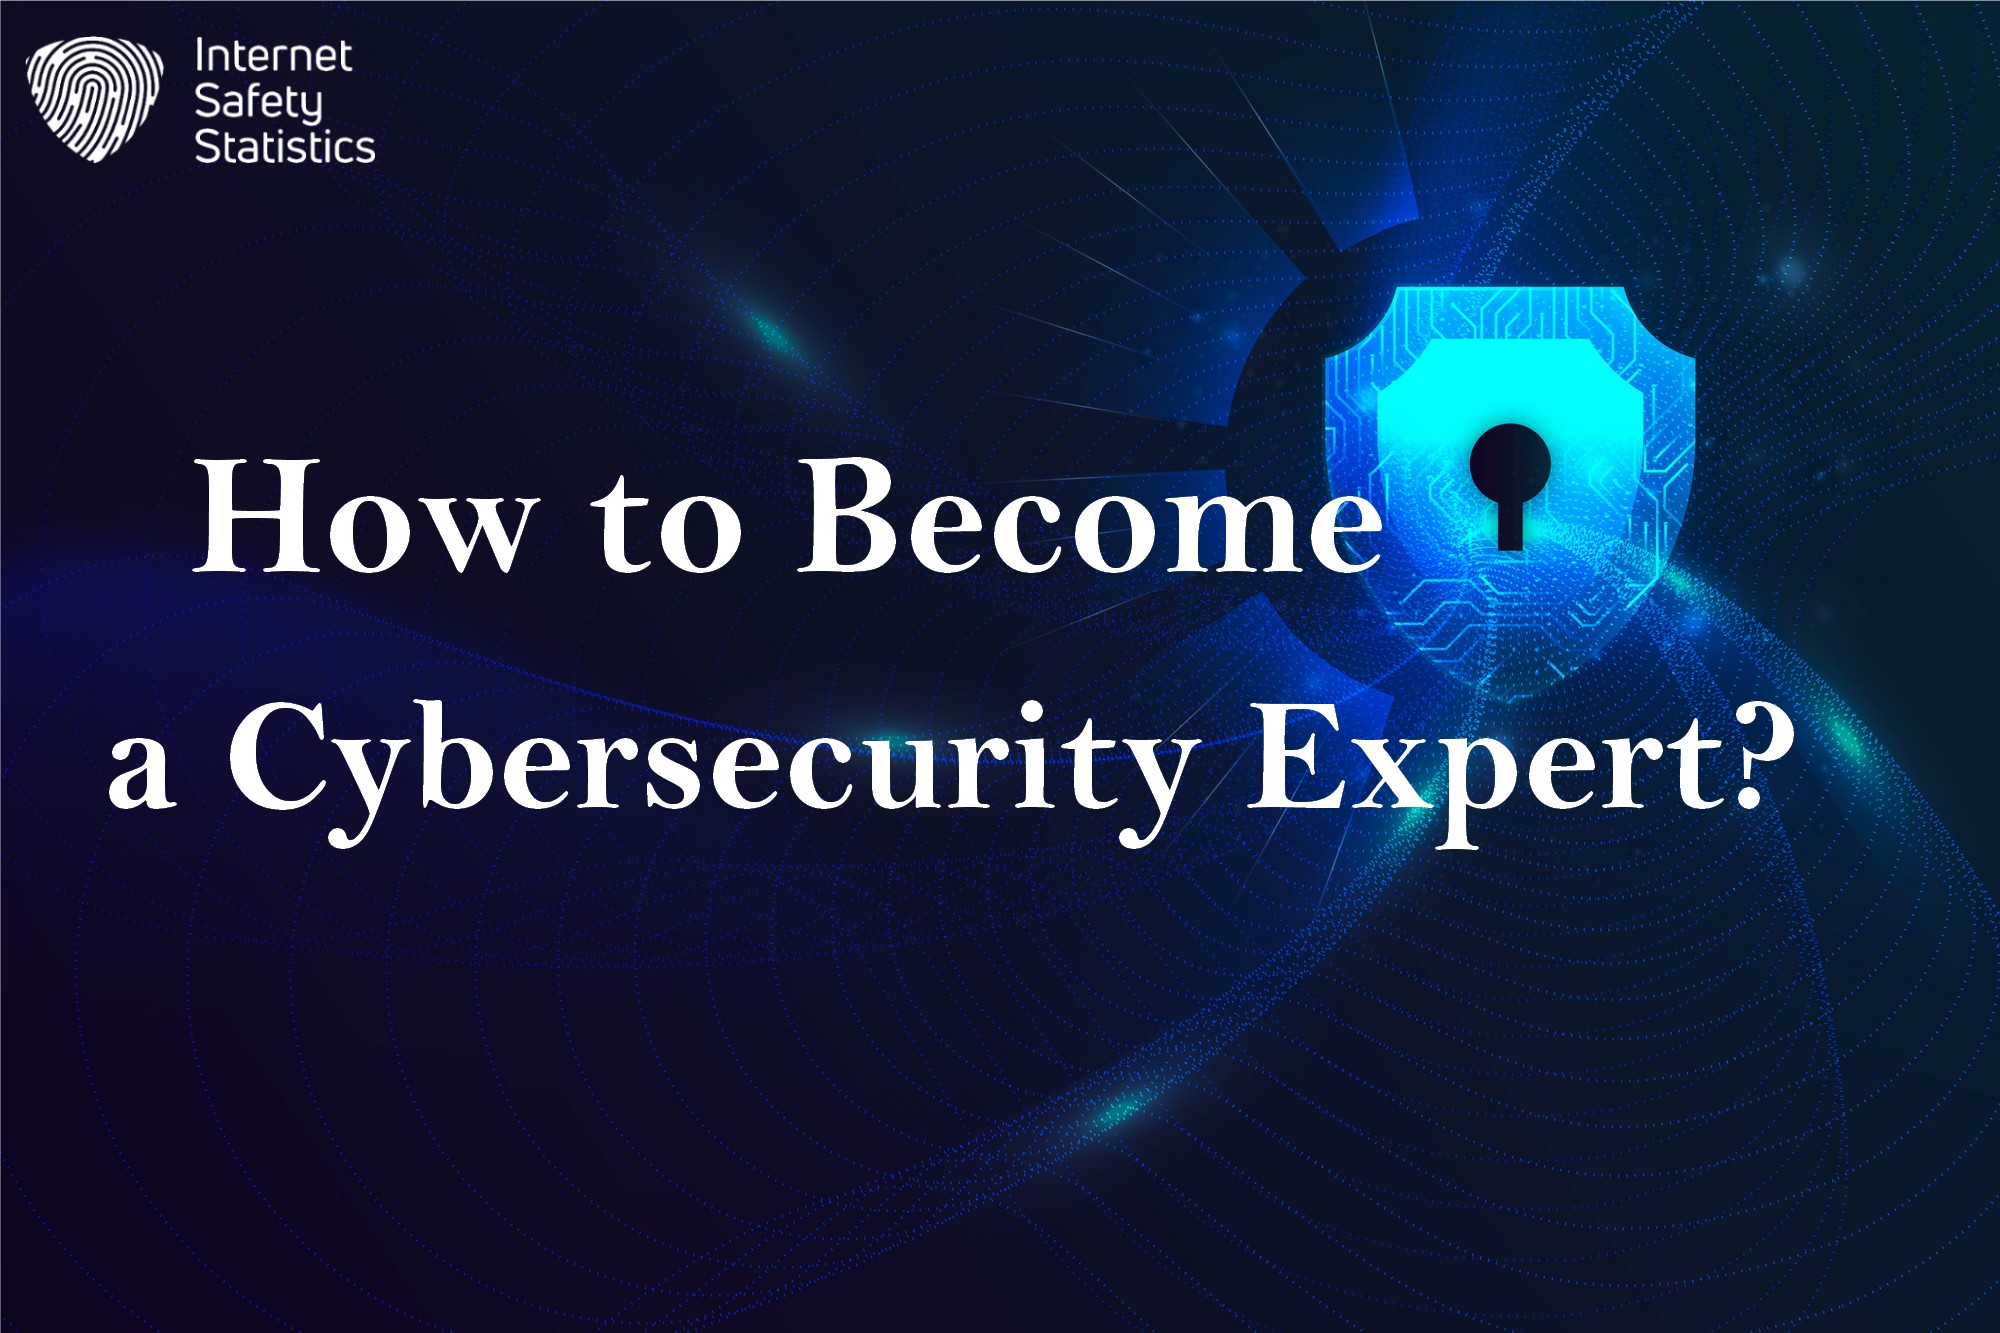 How to Become a Cybersecurity Expert? Steps to Becoming a Cybersecurity Expert